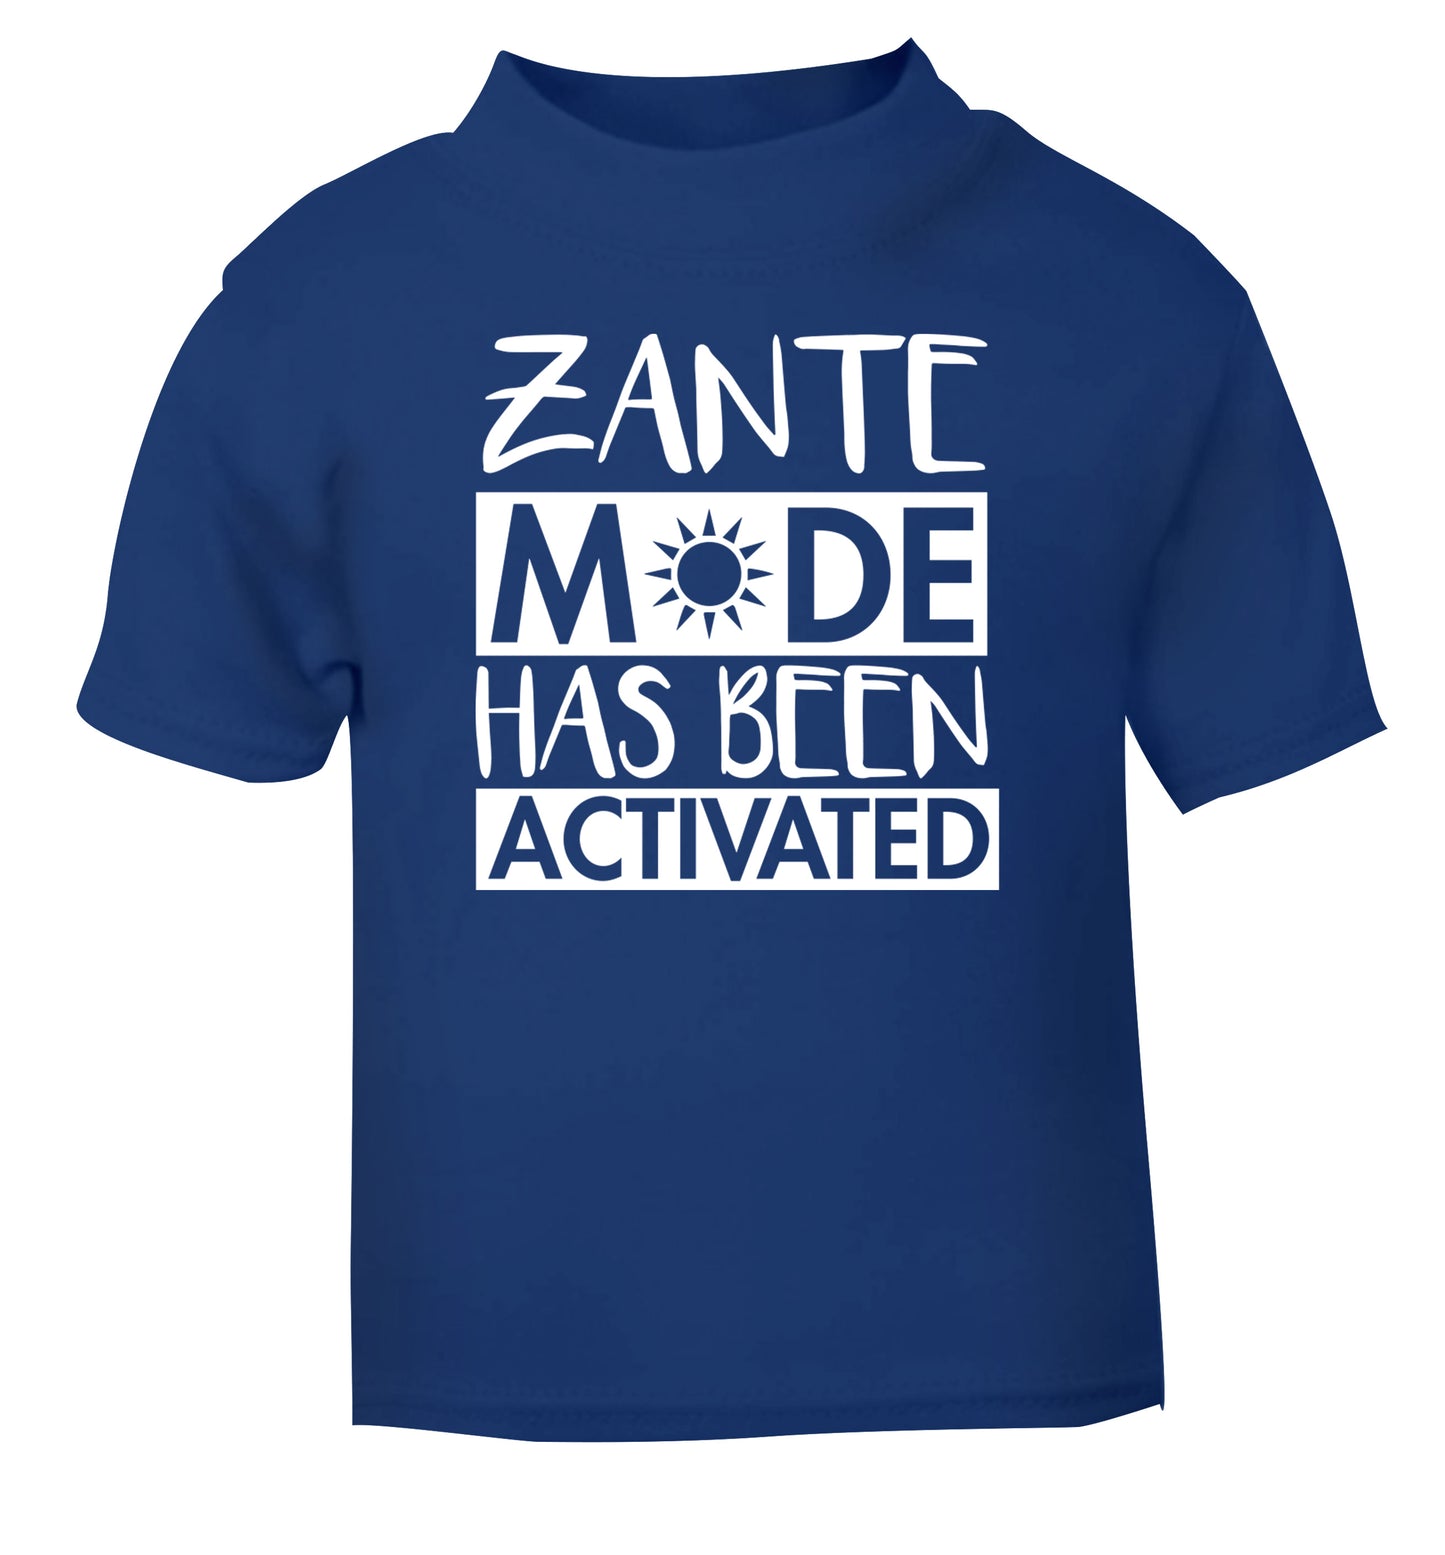 Zante mode has been activated blue Baby Toddler Tshirt 2 Years